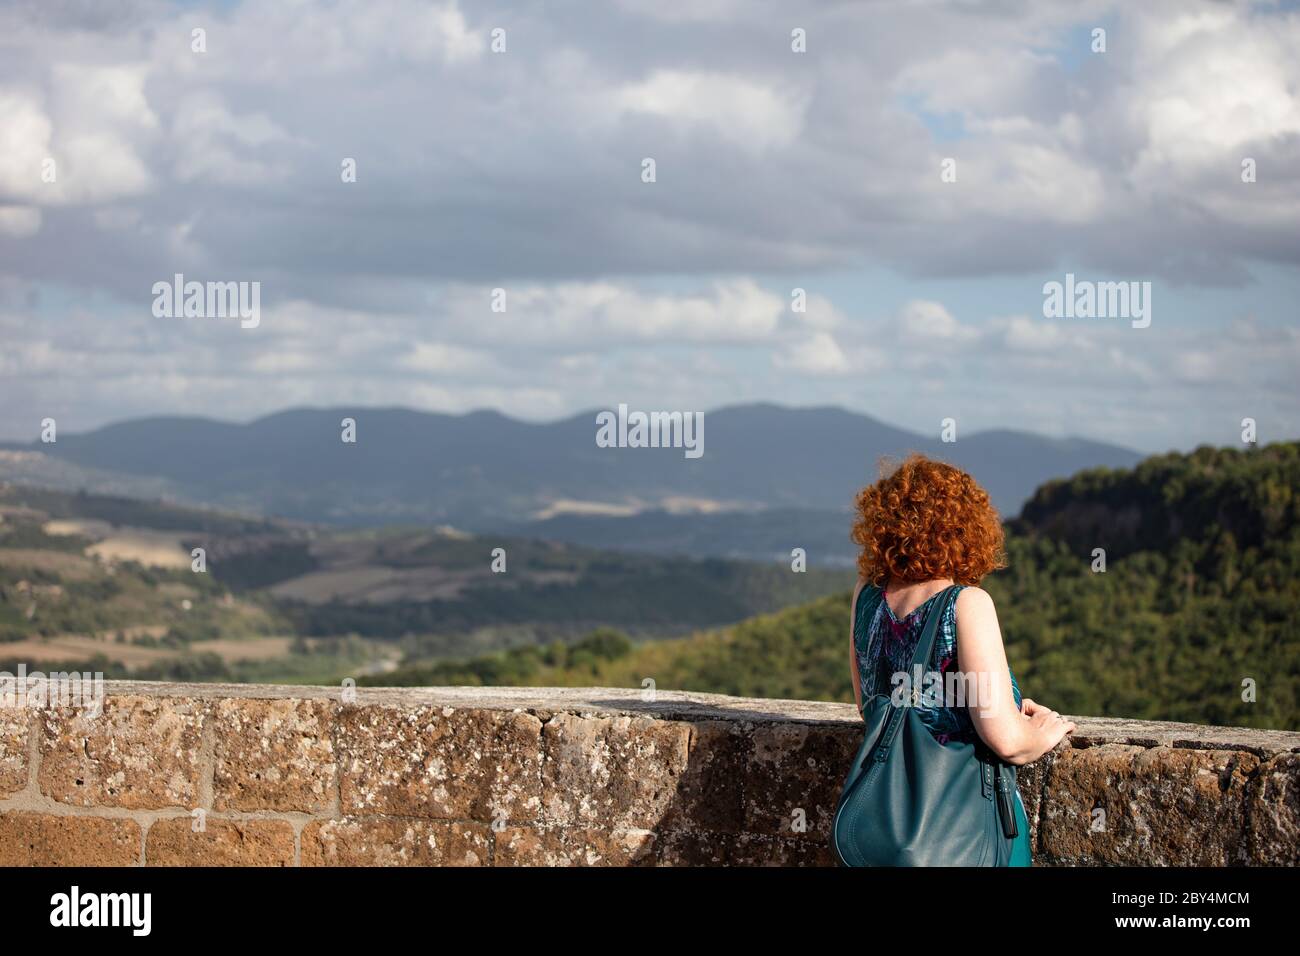 Woman with curly ginger hair standing looking over a stone wall at an Italian landscape in Orvieto, Umbria. Stock Photo